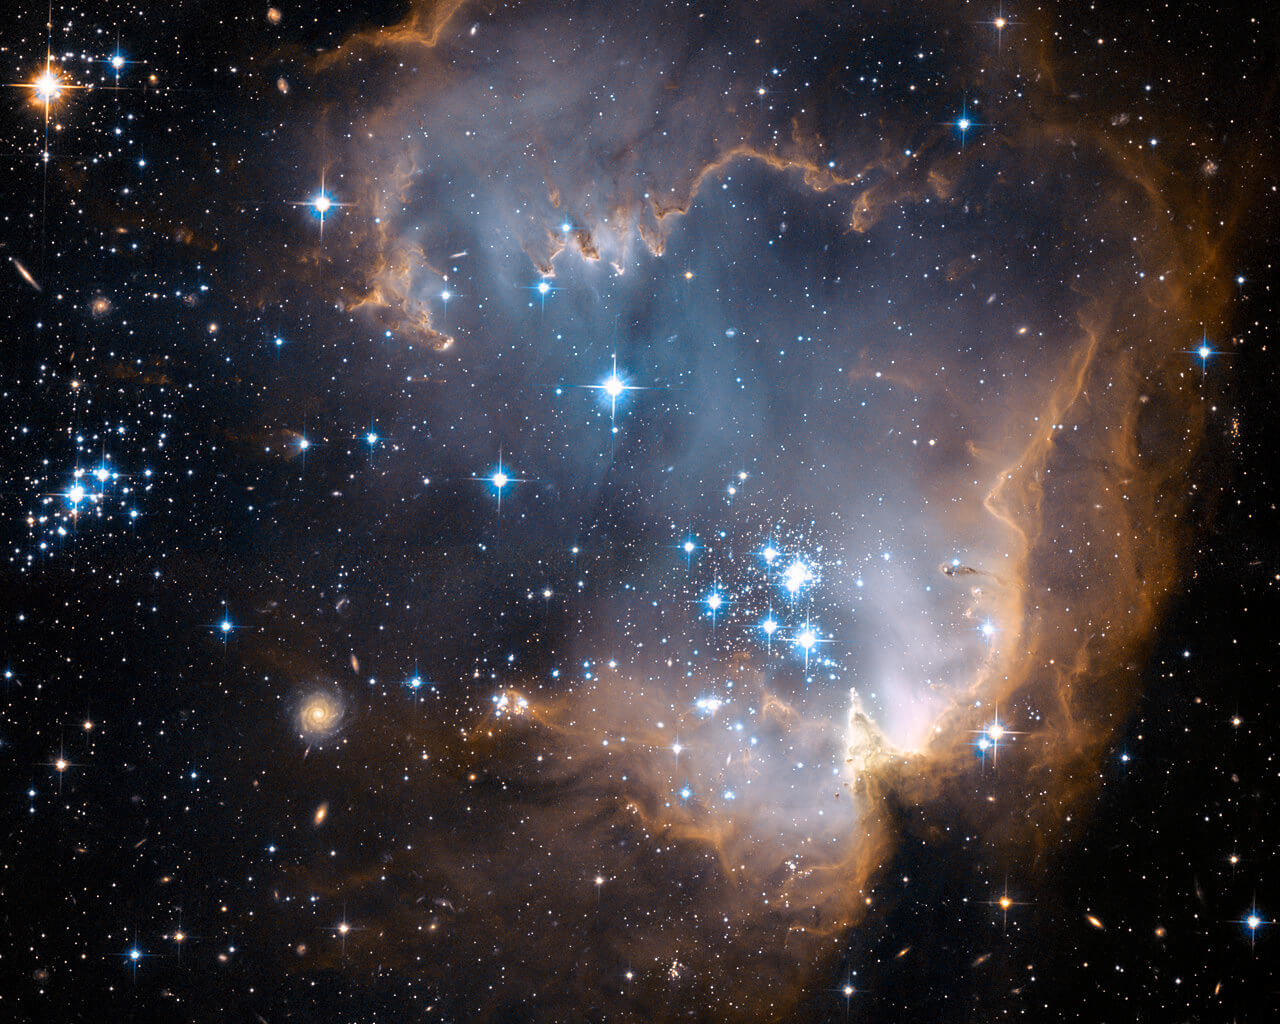 space is so cool - hubble pictures 18 (1)